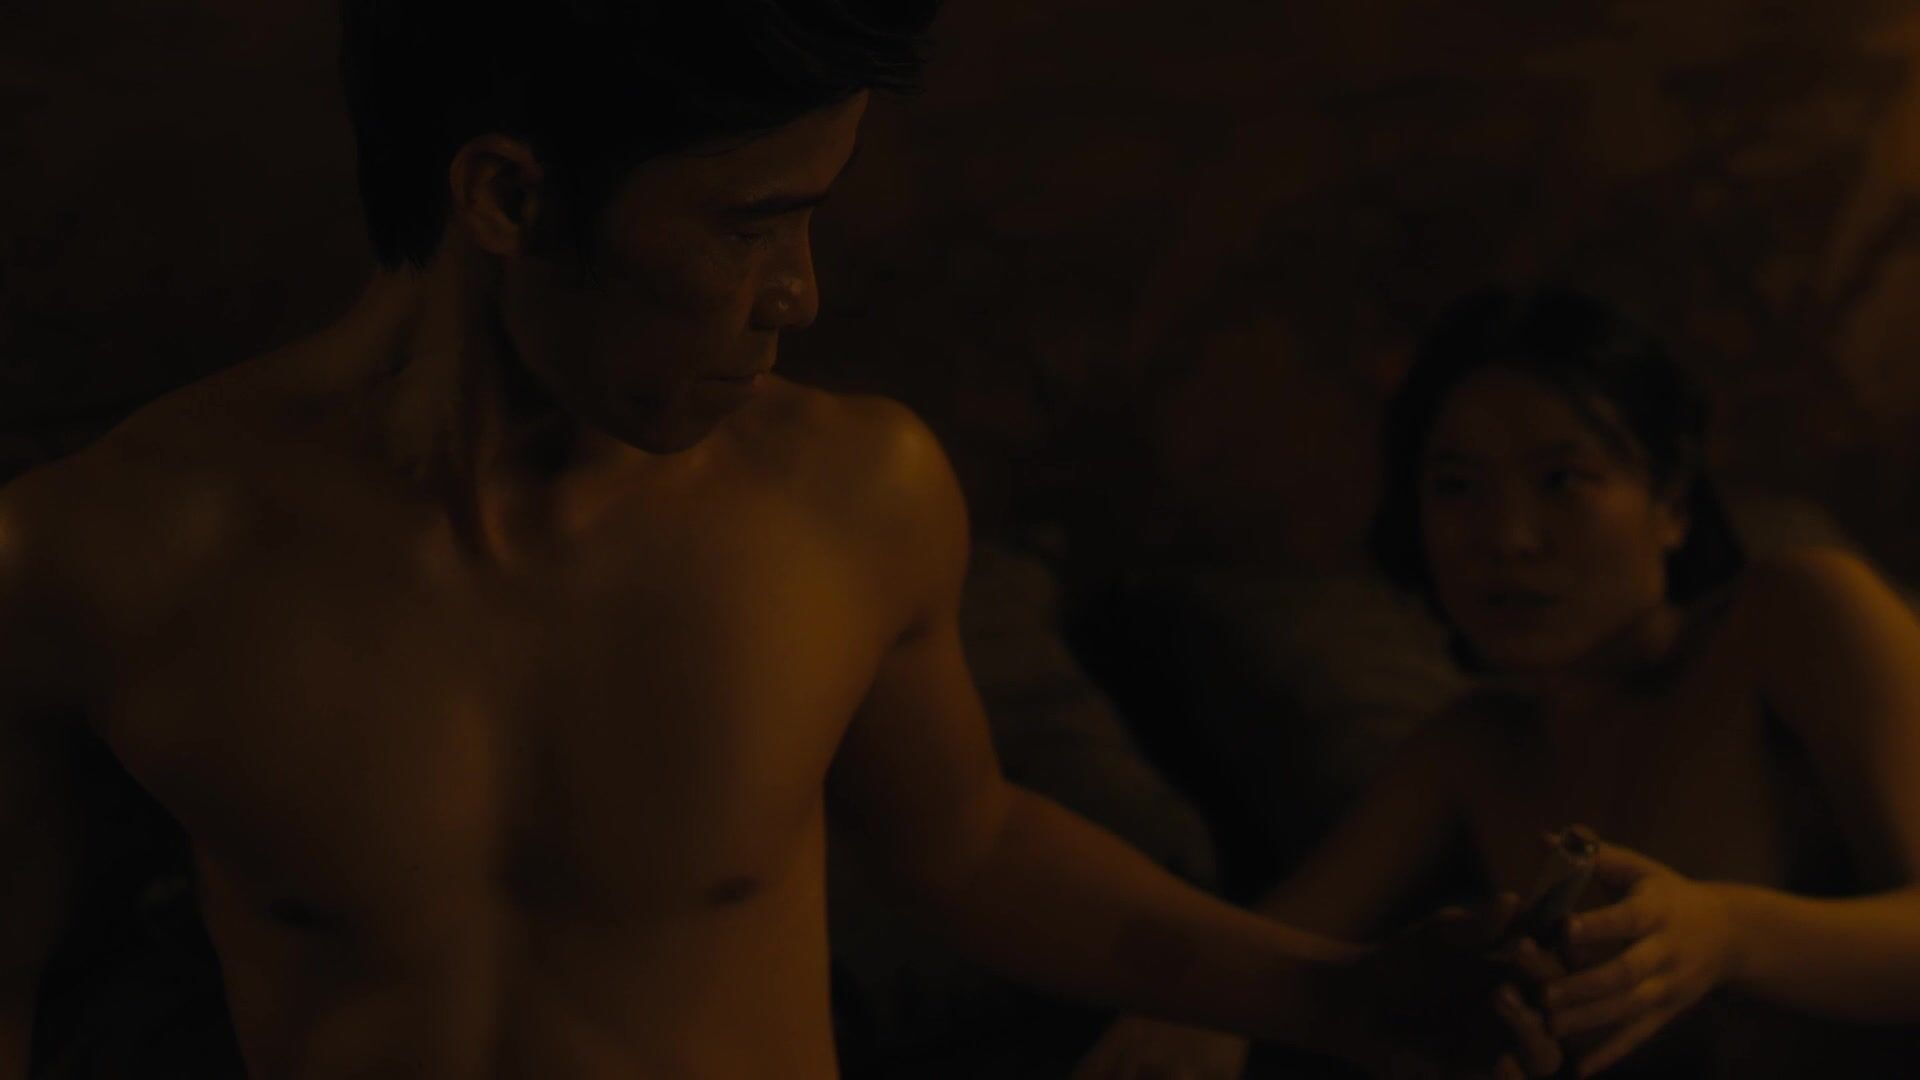 Big Butt Hanni Choi is sexy to look at in Warrior s01e07 (2019) Fun - 2